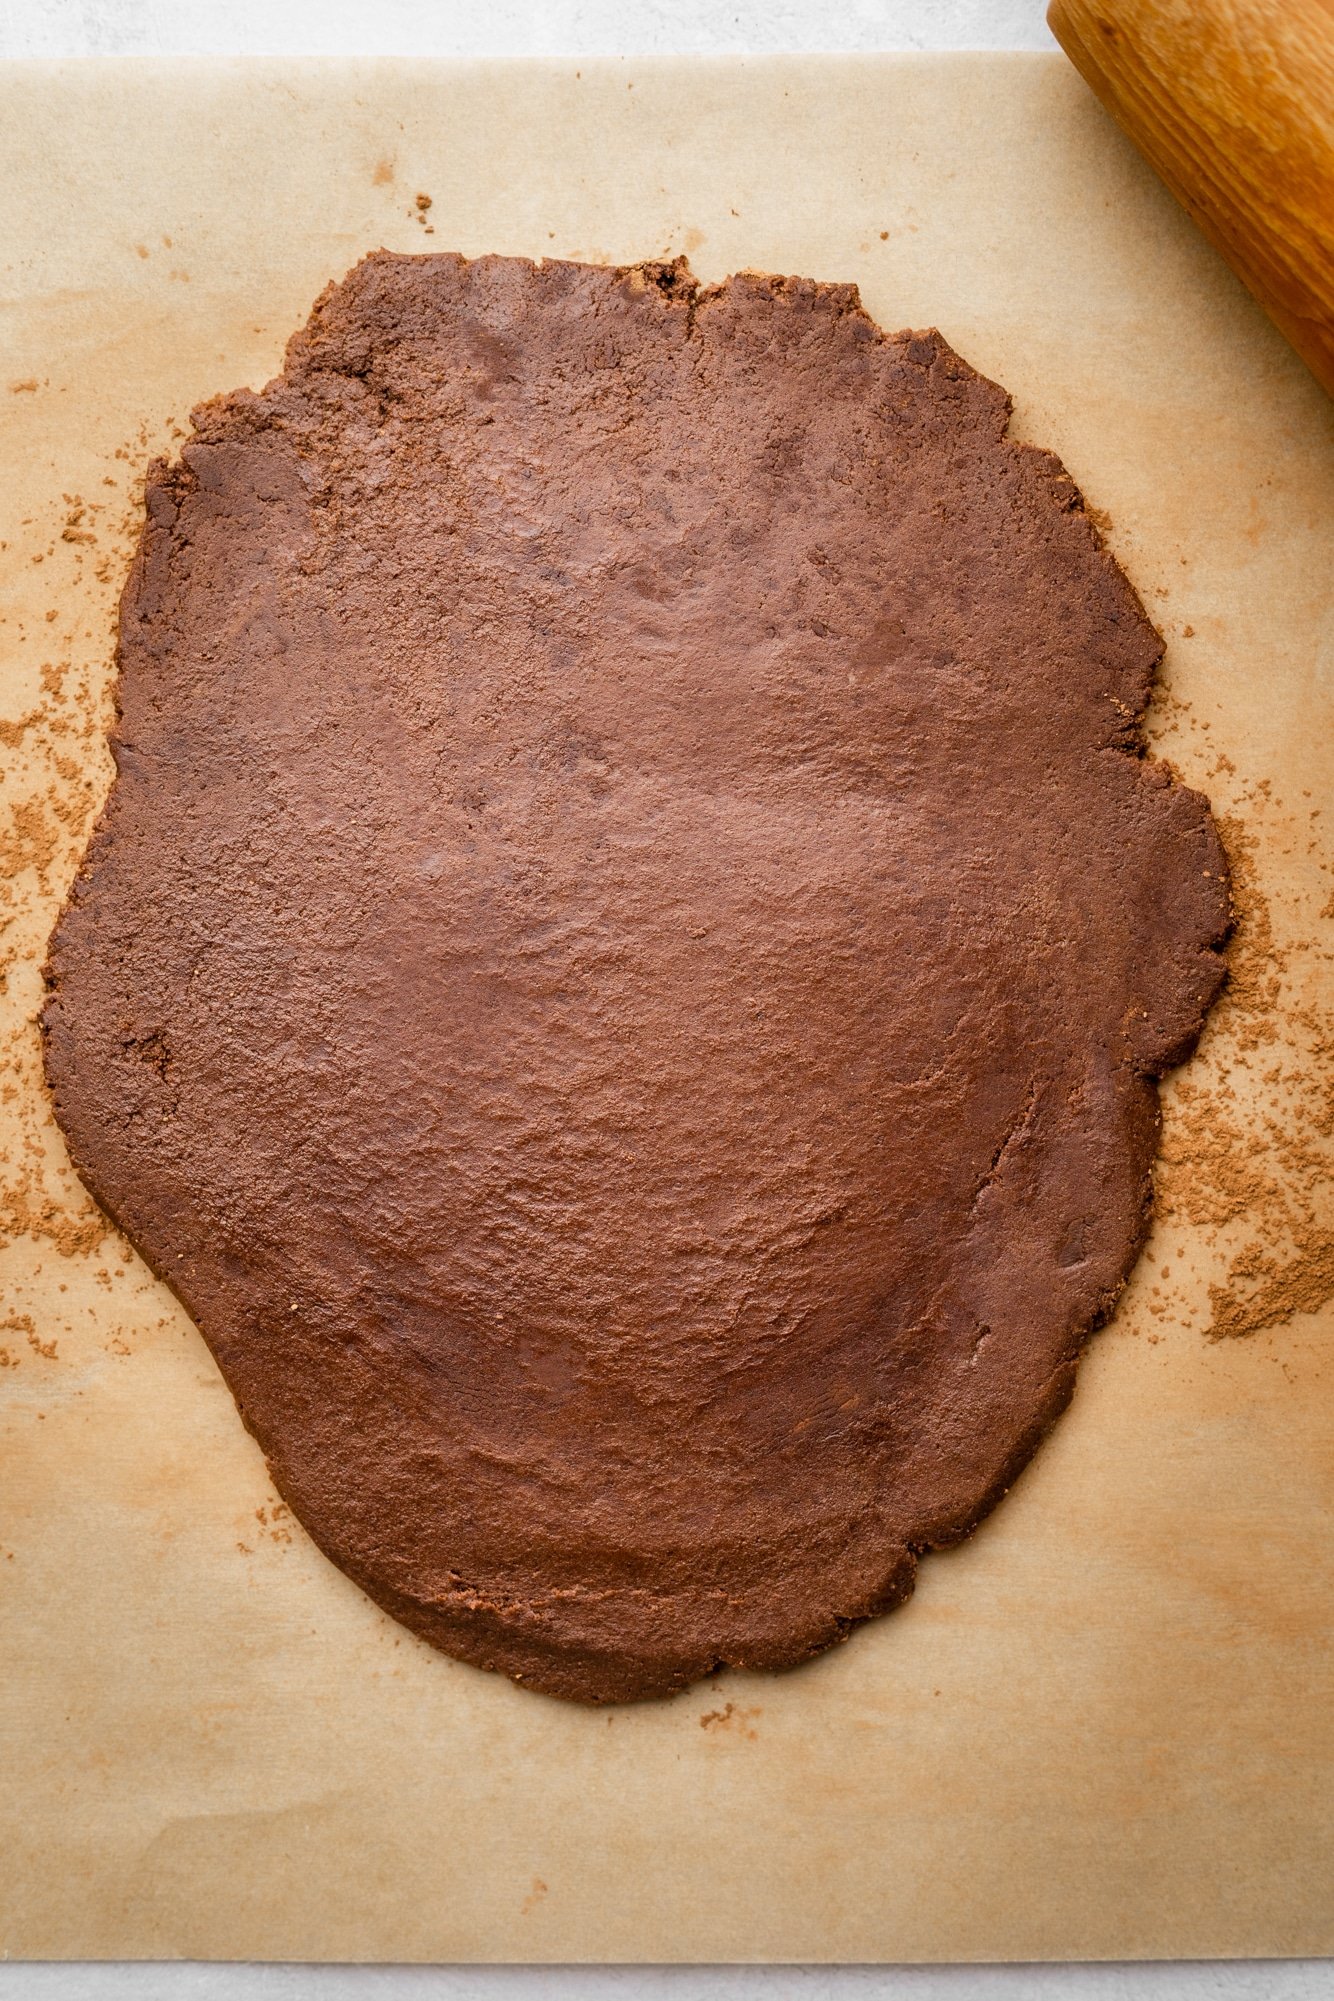 chocolate cookie dough rolled out into a flat layer on a parchment-lined surface.